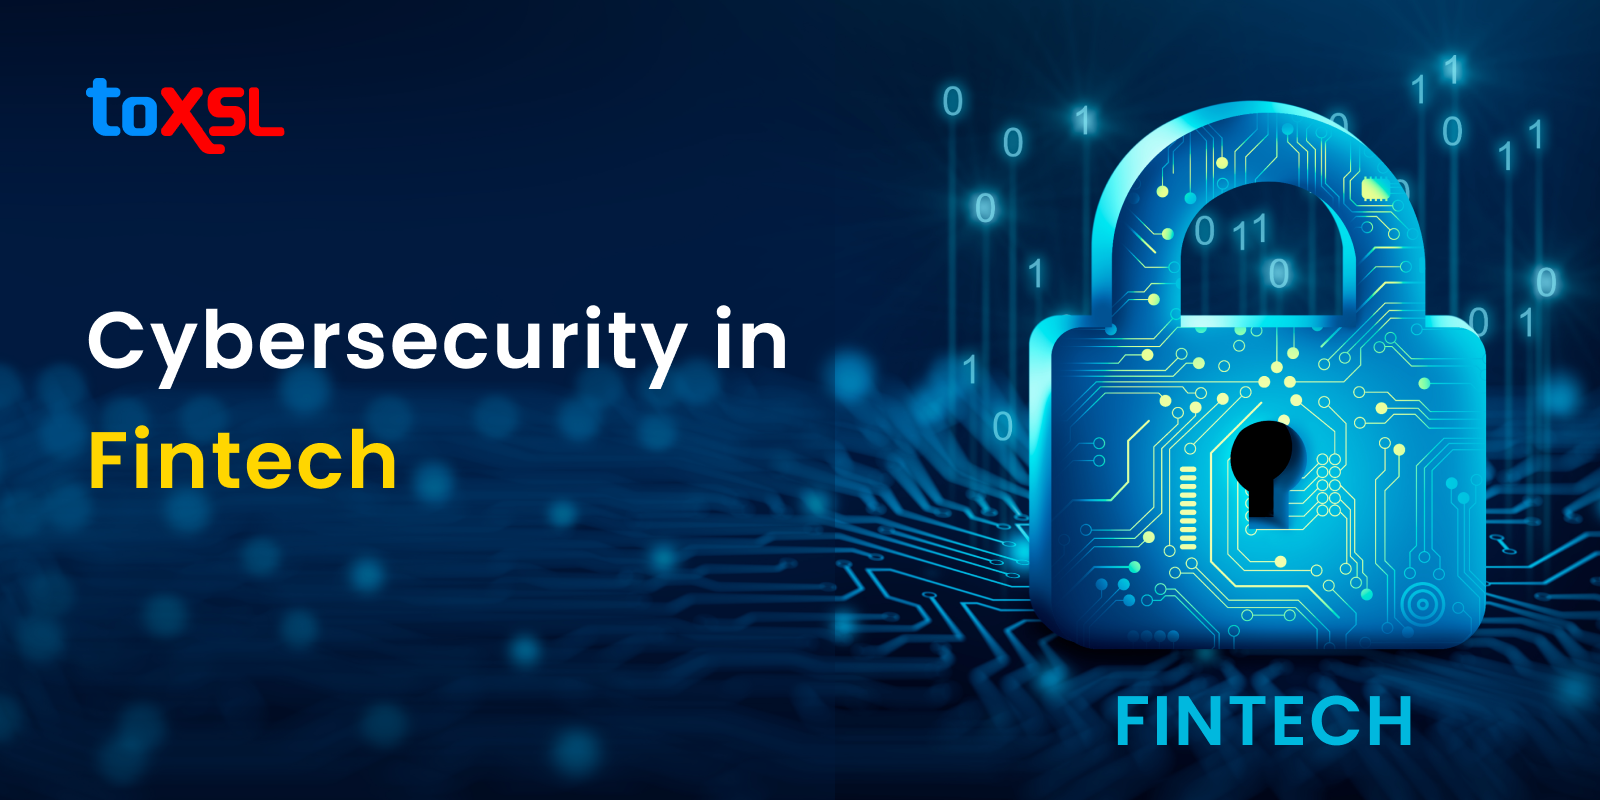 Cybersecurity in Fintech: The Ultimate Guide to Developing a Secure Fintech Application